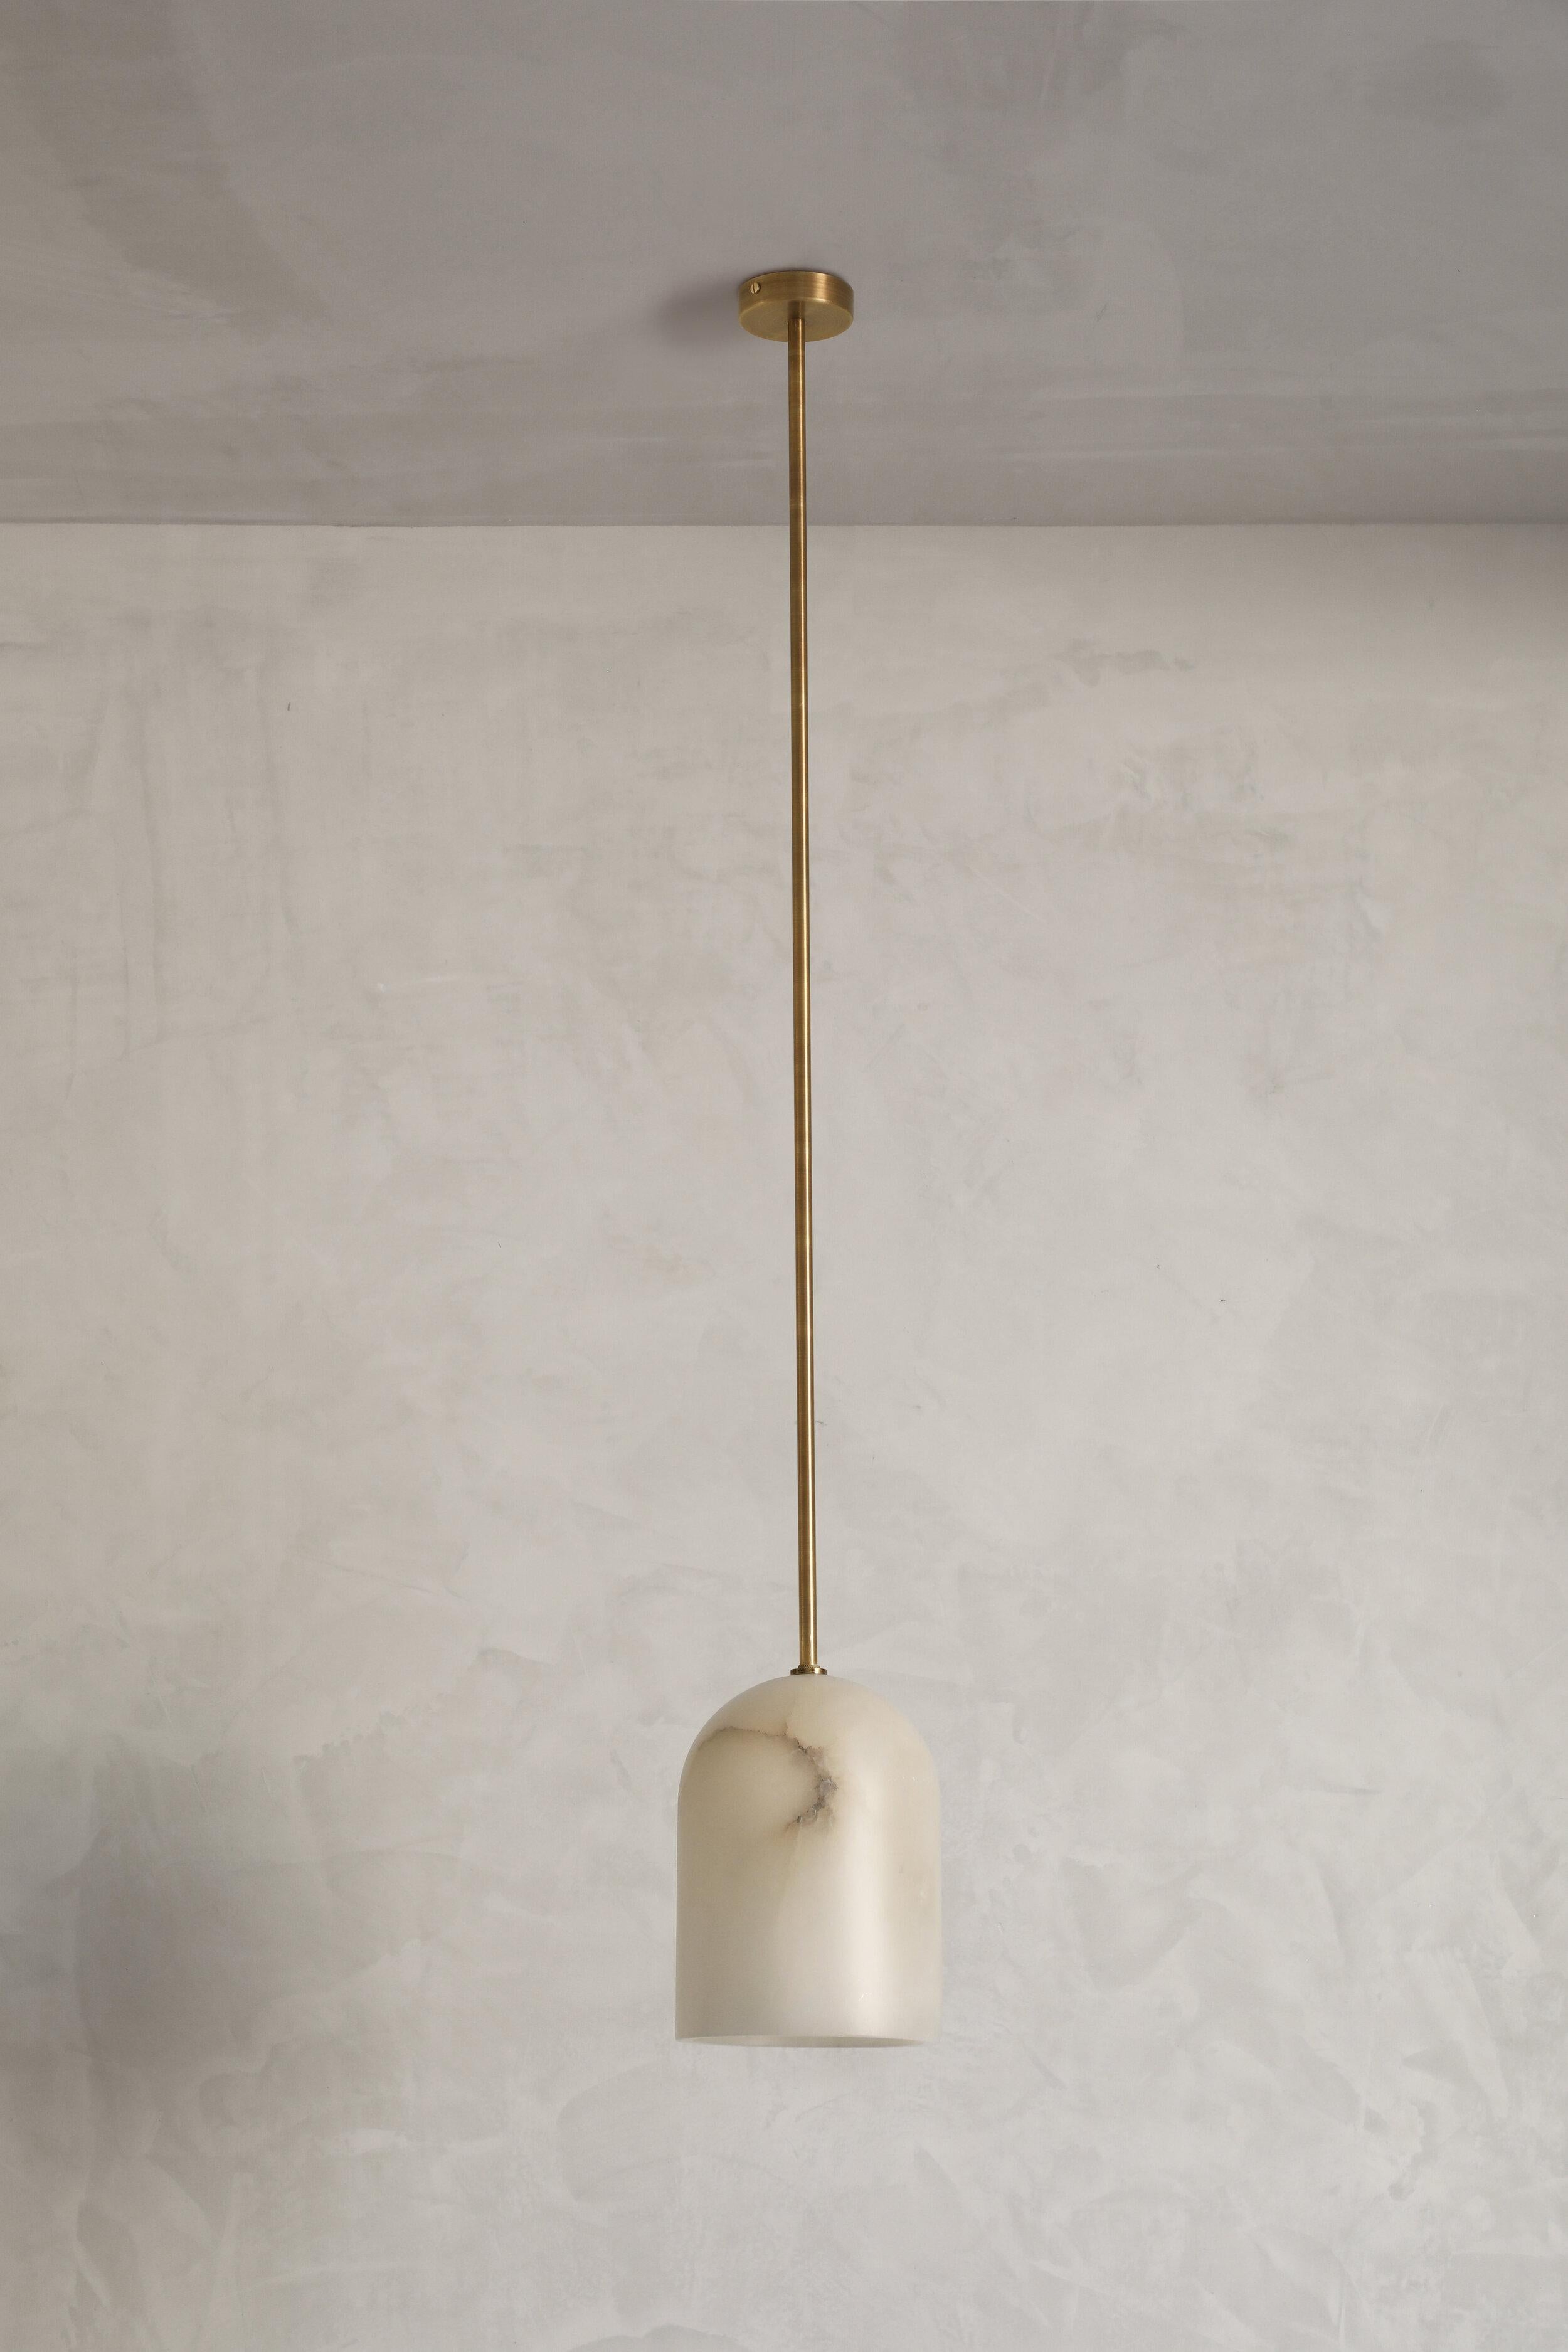 Belfry Alabaster tube 22 pendant by Contain
Dimensions: Ø 22 x H 22 cm.
Materials: brass structure and alabaster stone.

Also available in different finishes and dimensions: Ø16 cm / Ø22 cm / Ø28 cm x custom length. Please contact us.

Socket: